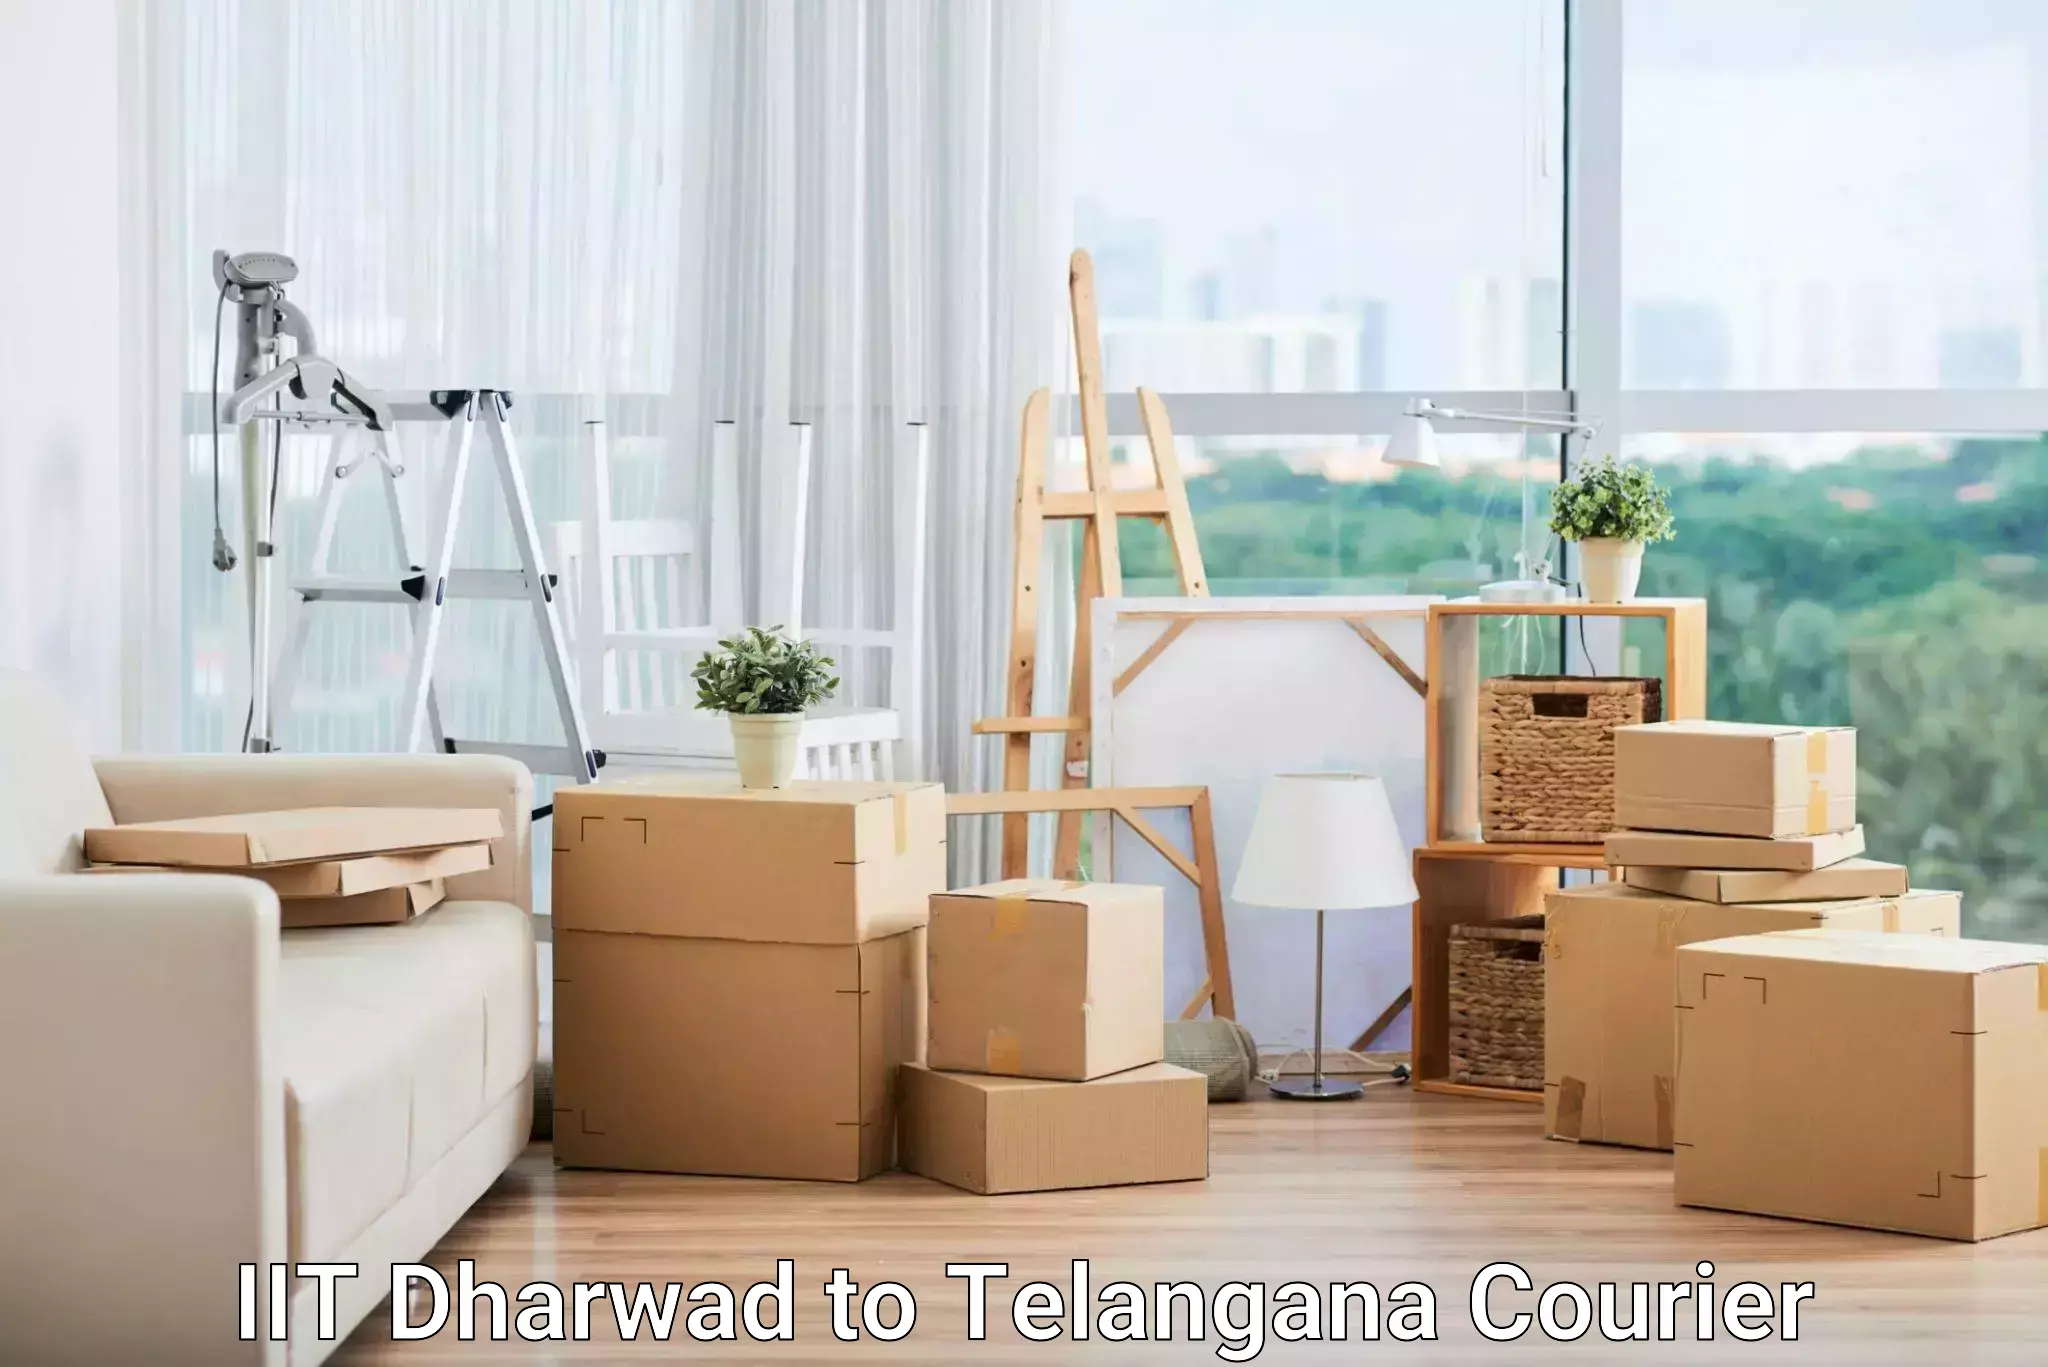 Cargo delivery service IIT Dharwad to Manneguda